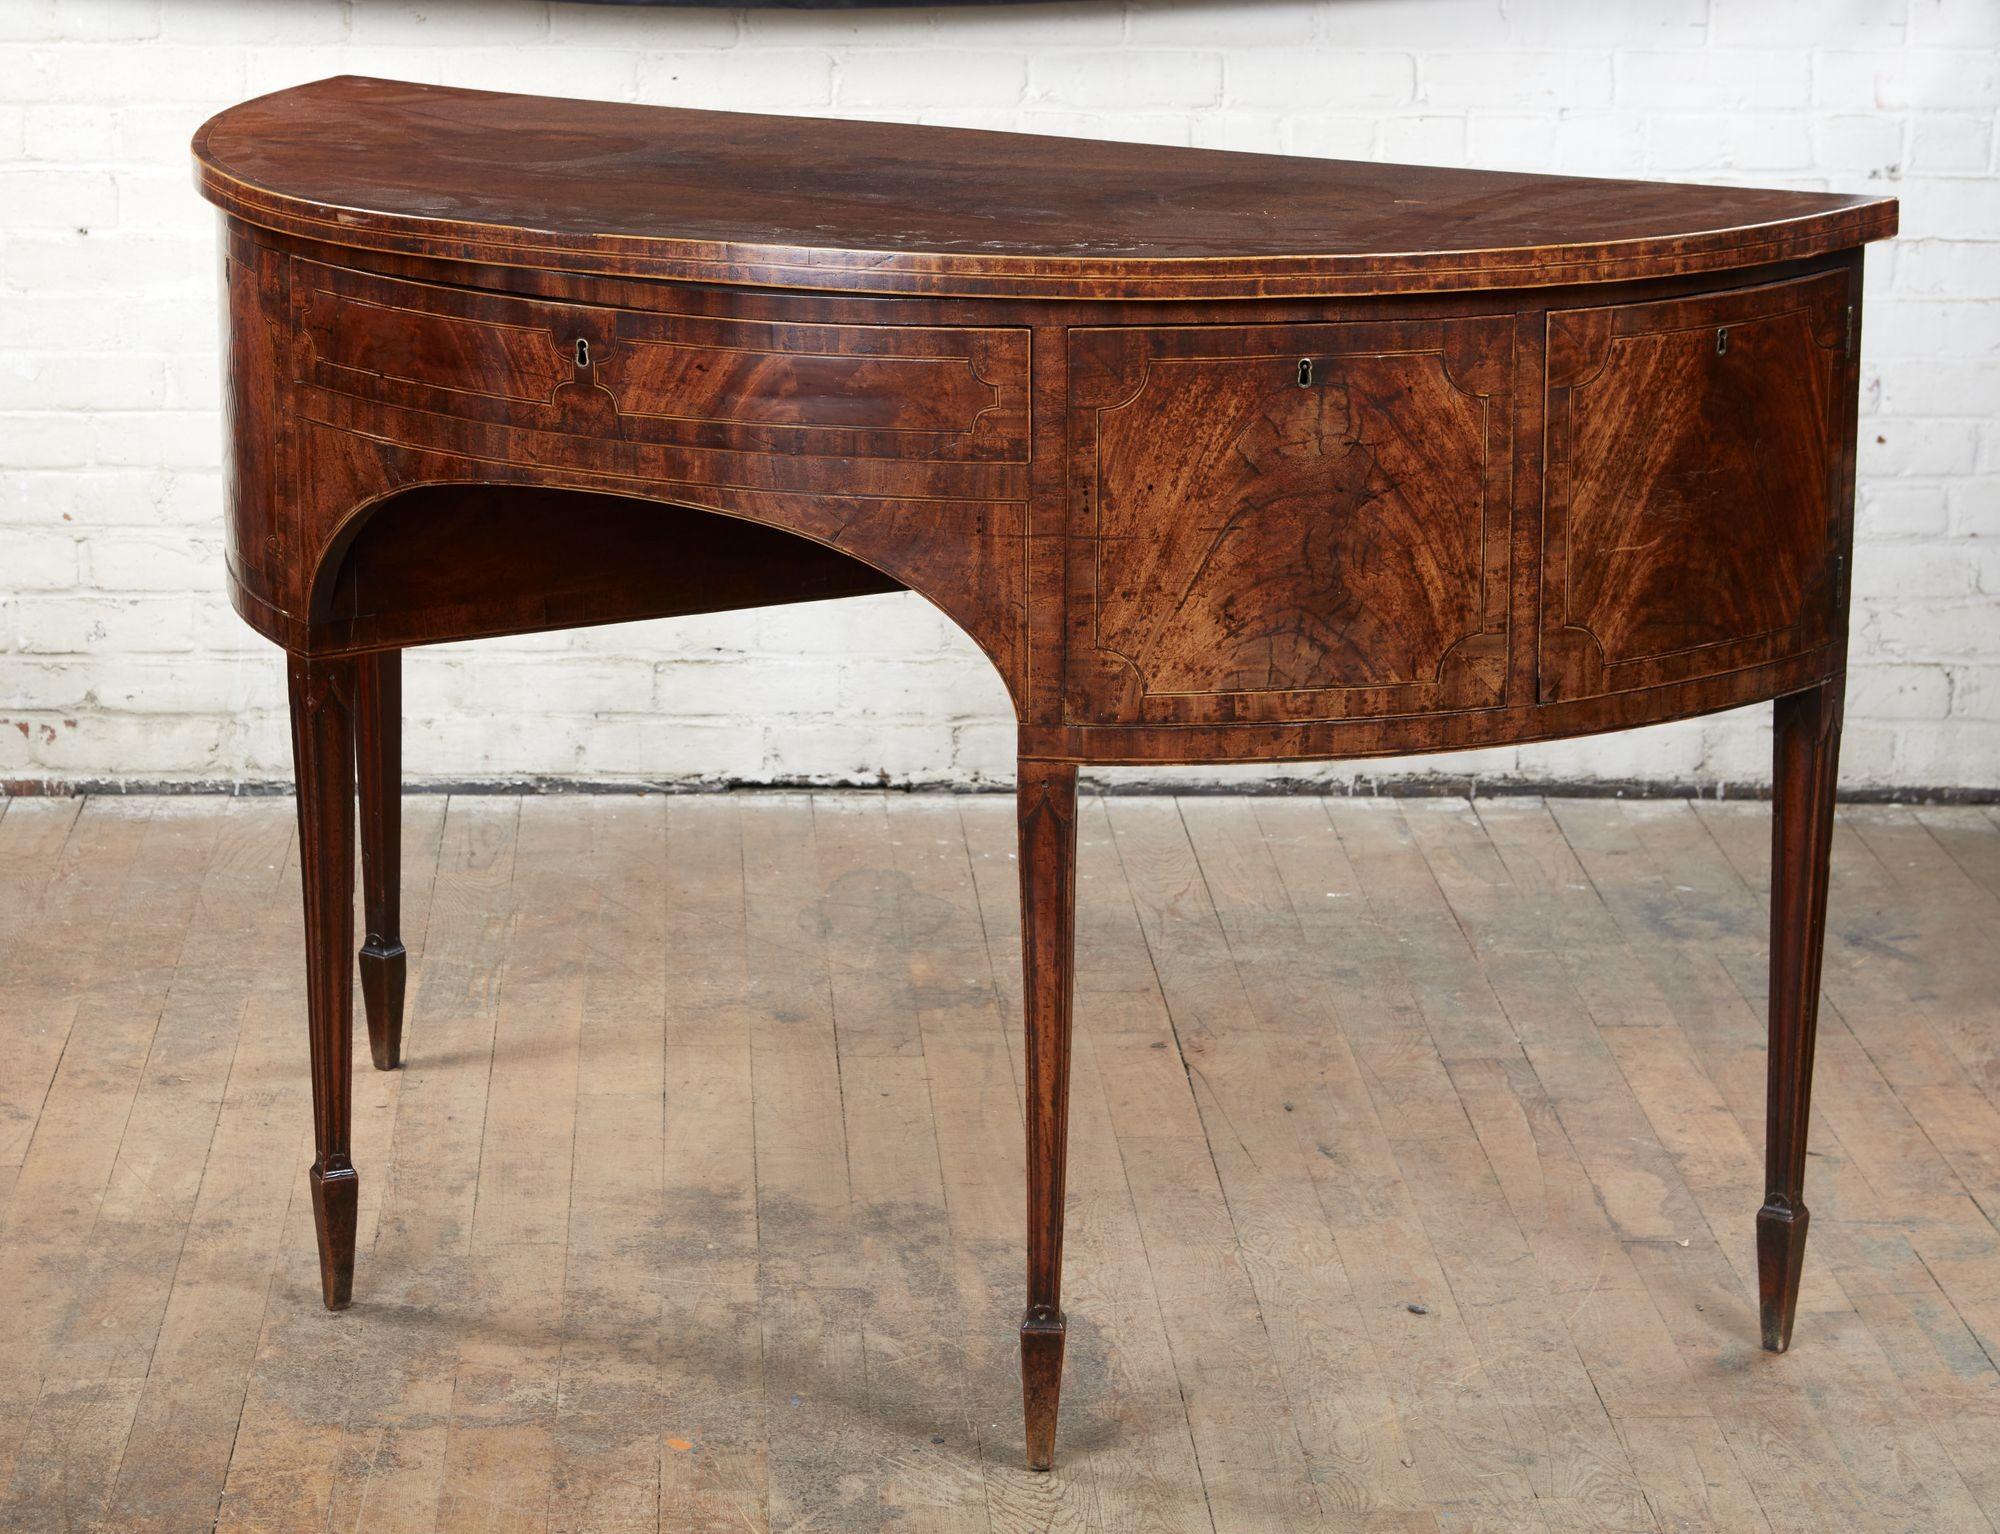 Exceptionally fine George III mahogany demilune sideboard, the richly figured and patinated single board top with holly stringing and mahogany crossbanding, the shallow middle drawer with fitted compartment and flanked by fitted drawers and drawers,